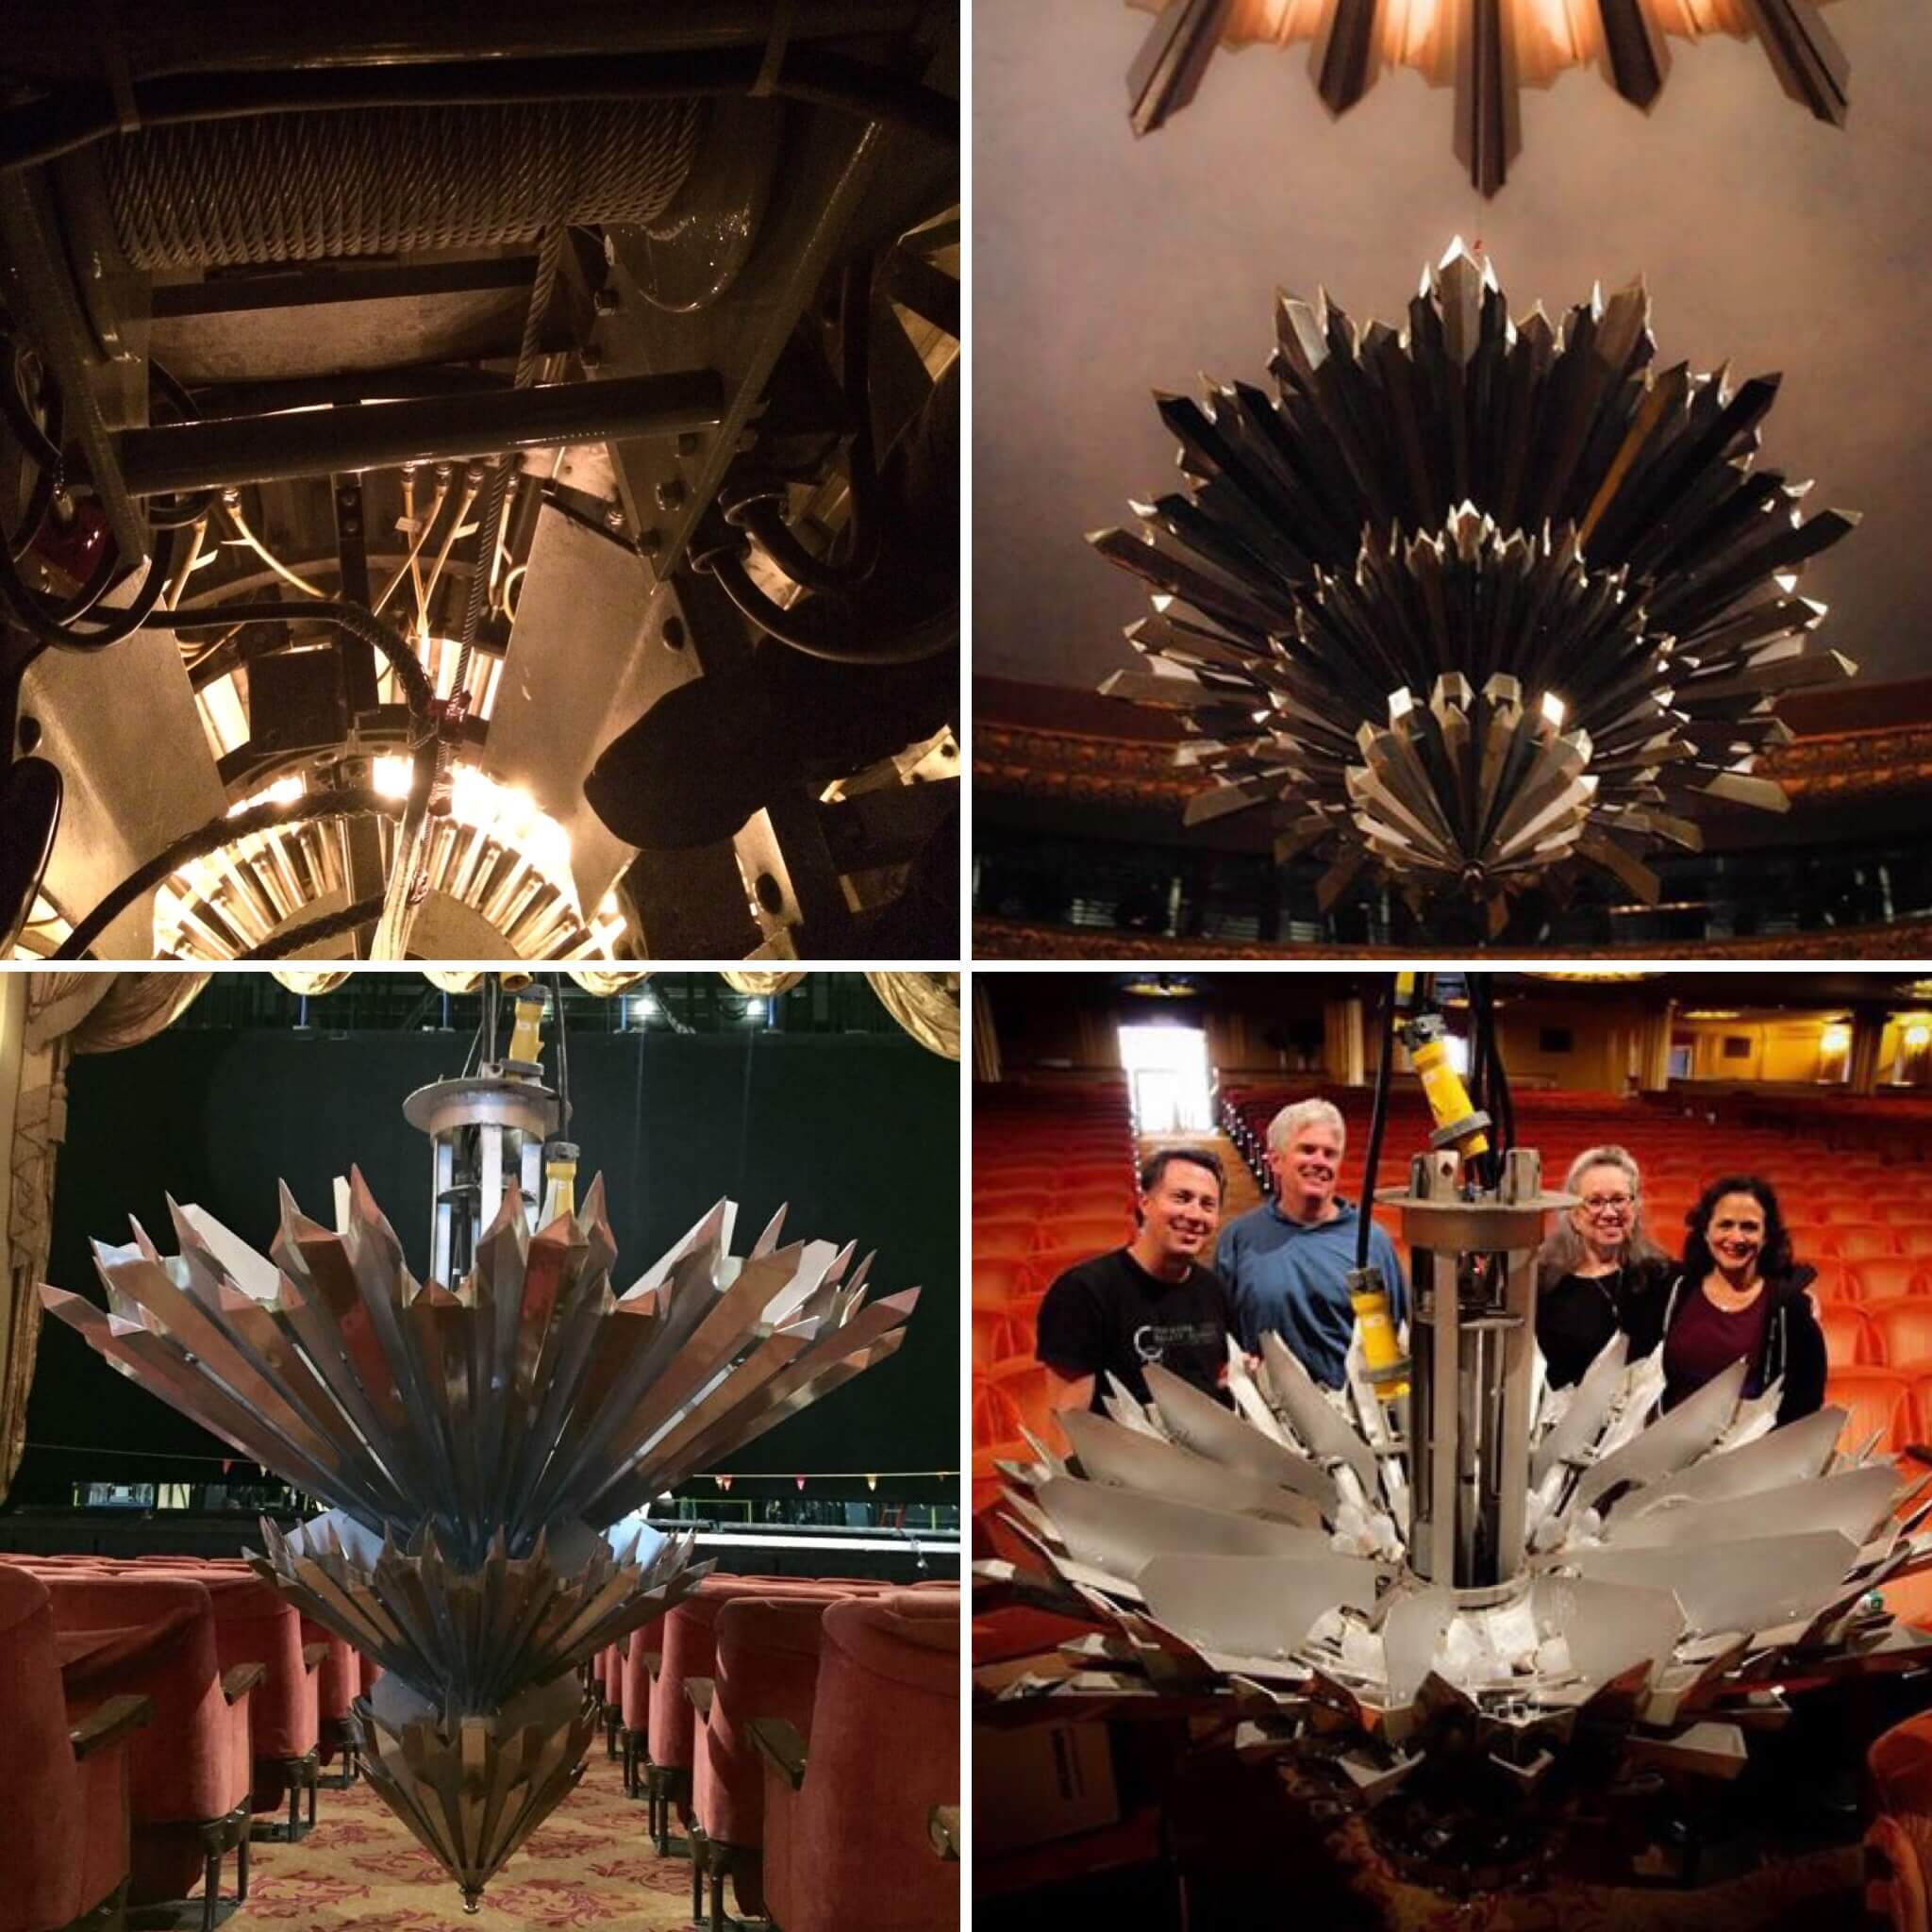 The descent of the chandelier tip. Clockwise from top left: the winch motor; the tip leaves the ‘mother ship’; a safe landing; the team gets to work (pictured with lighting designer Patty Ann Farrell). Photos courtesy John Boatwright and Ellen Presley.